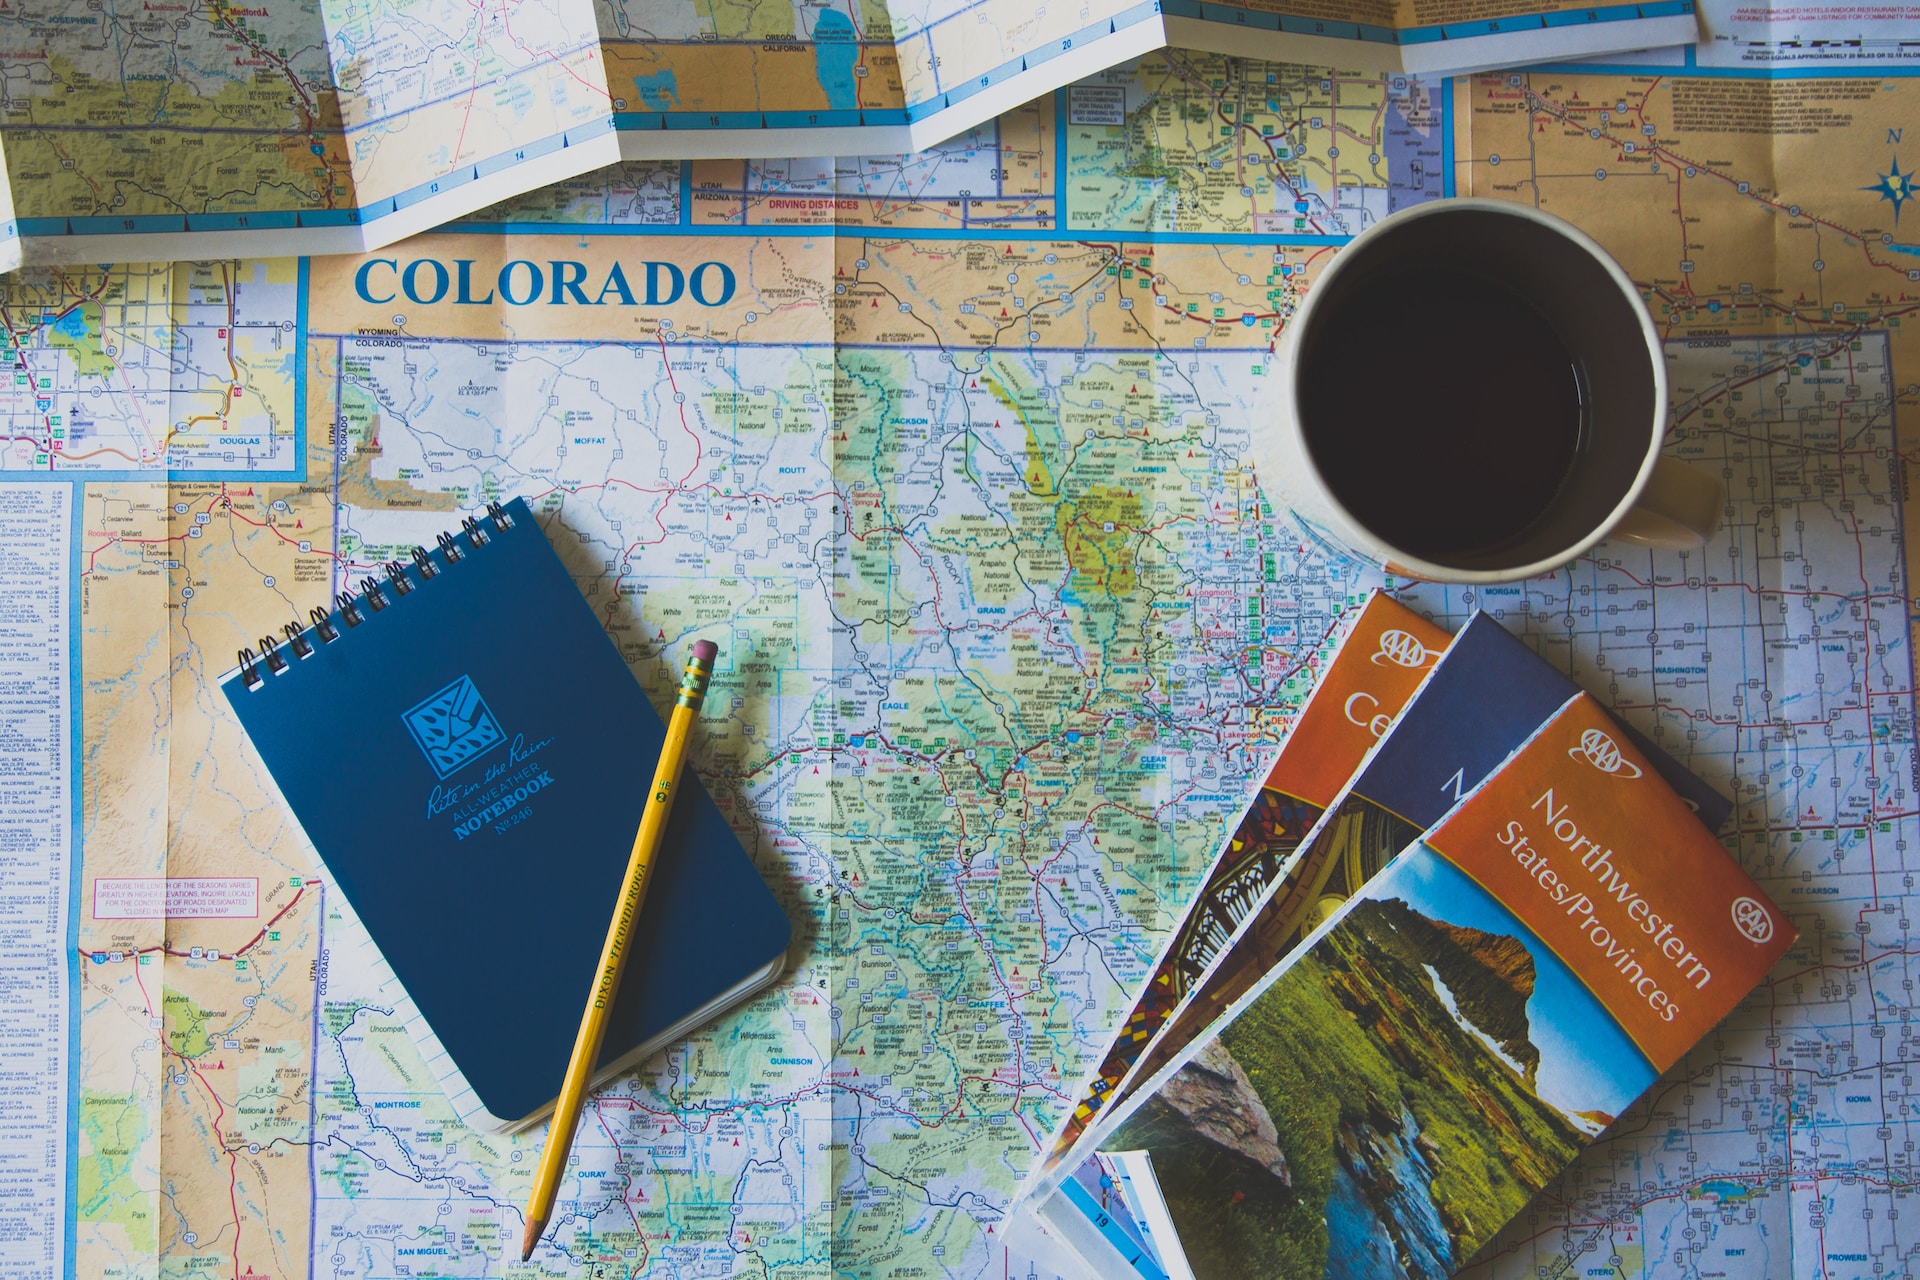 A view from above of a map of Colorado and maps on exploring the state.